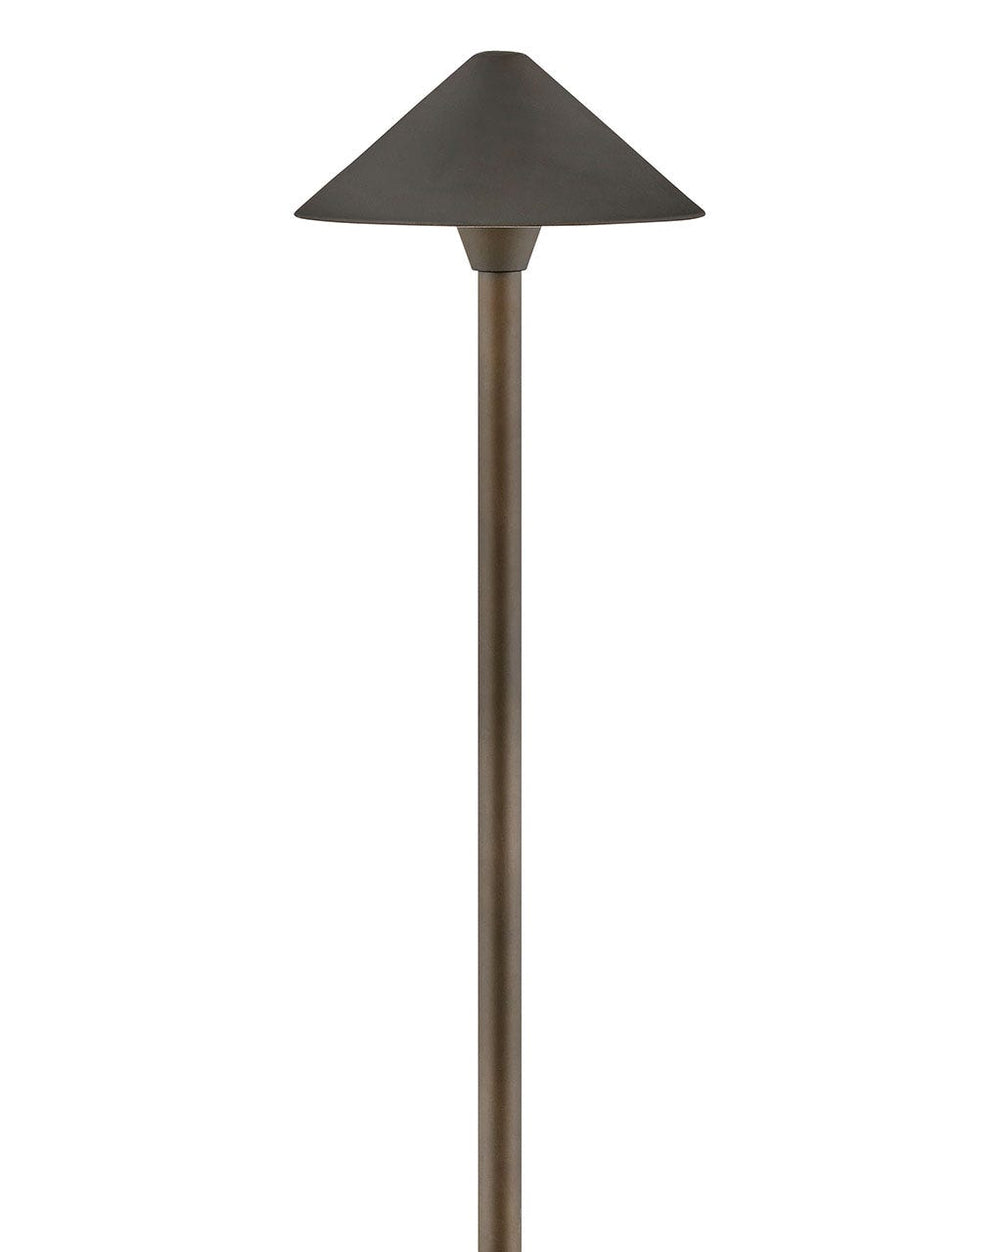 Landscape Springfield - Large Classic LED Path Light-Hinkley Lighting-HINKLEY-16019OZ-LL-Outdoor Post LanternsOil Rubbed Bronze-2-France and Son